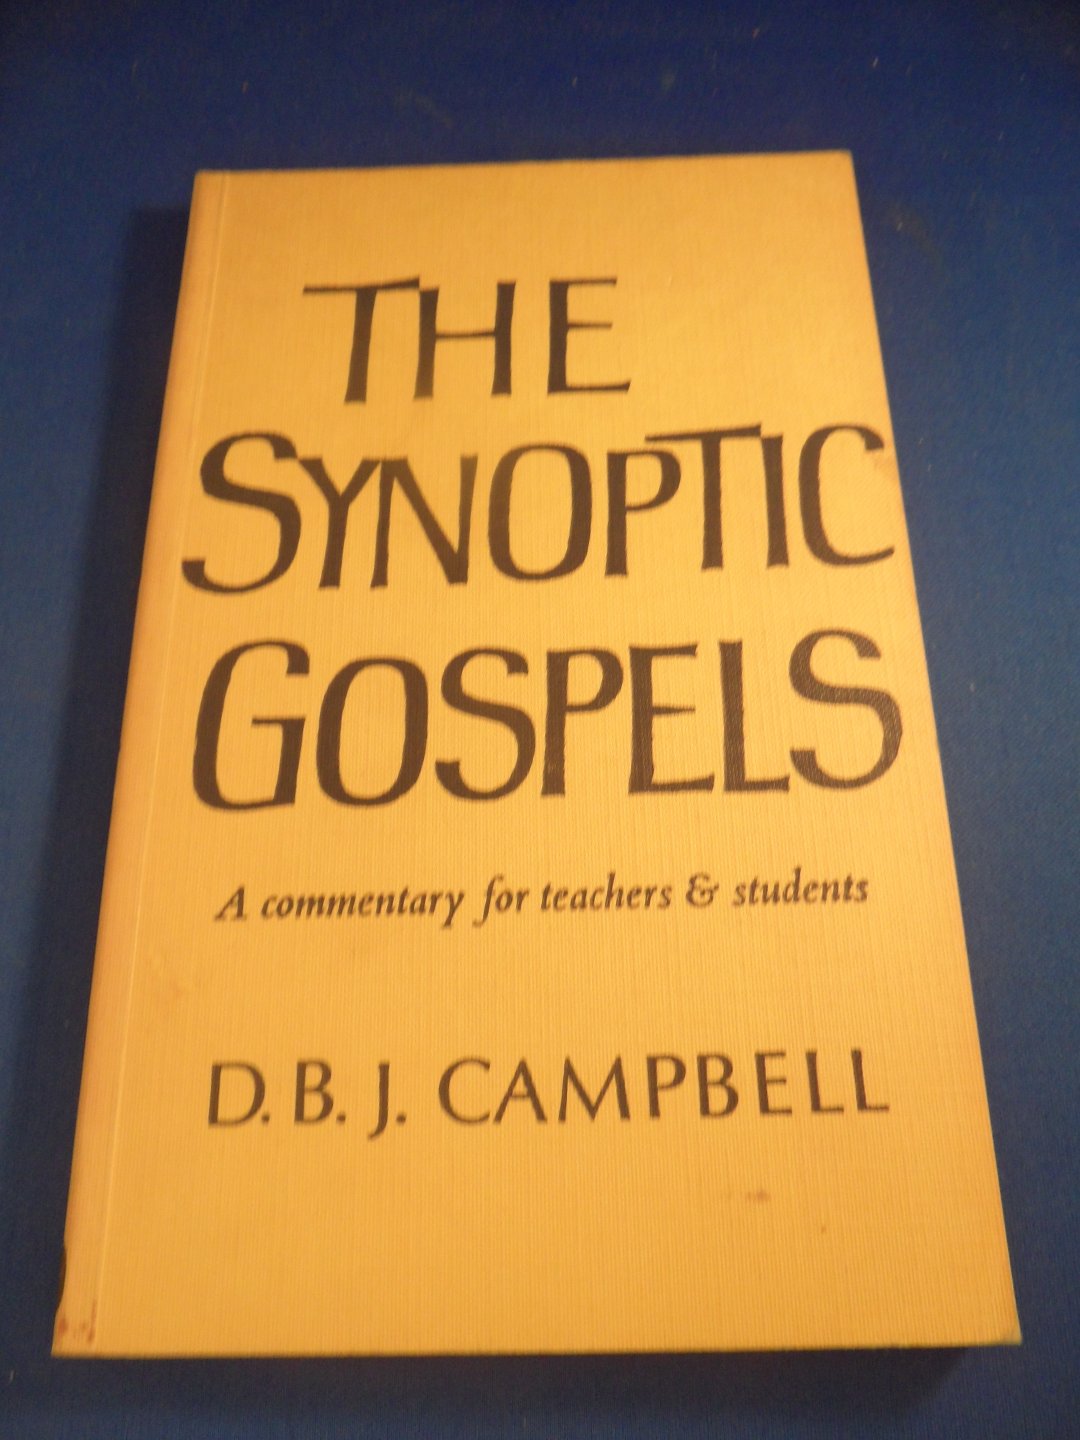 Campbell, D.B.J. - The synoptic Gospels, a commentary for teachers & students